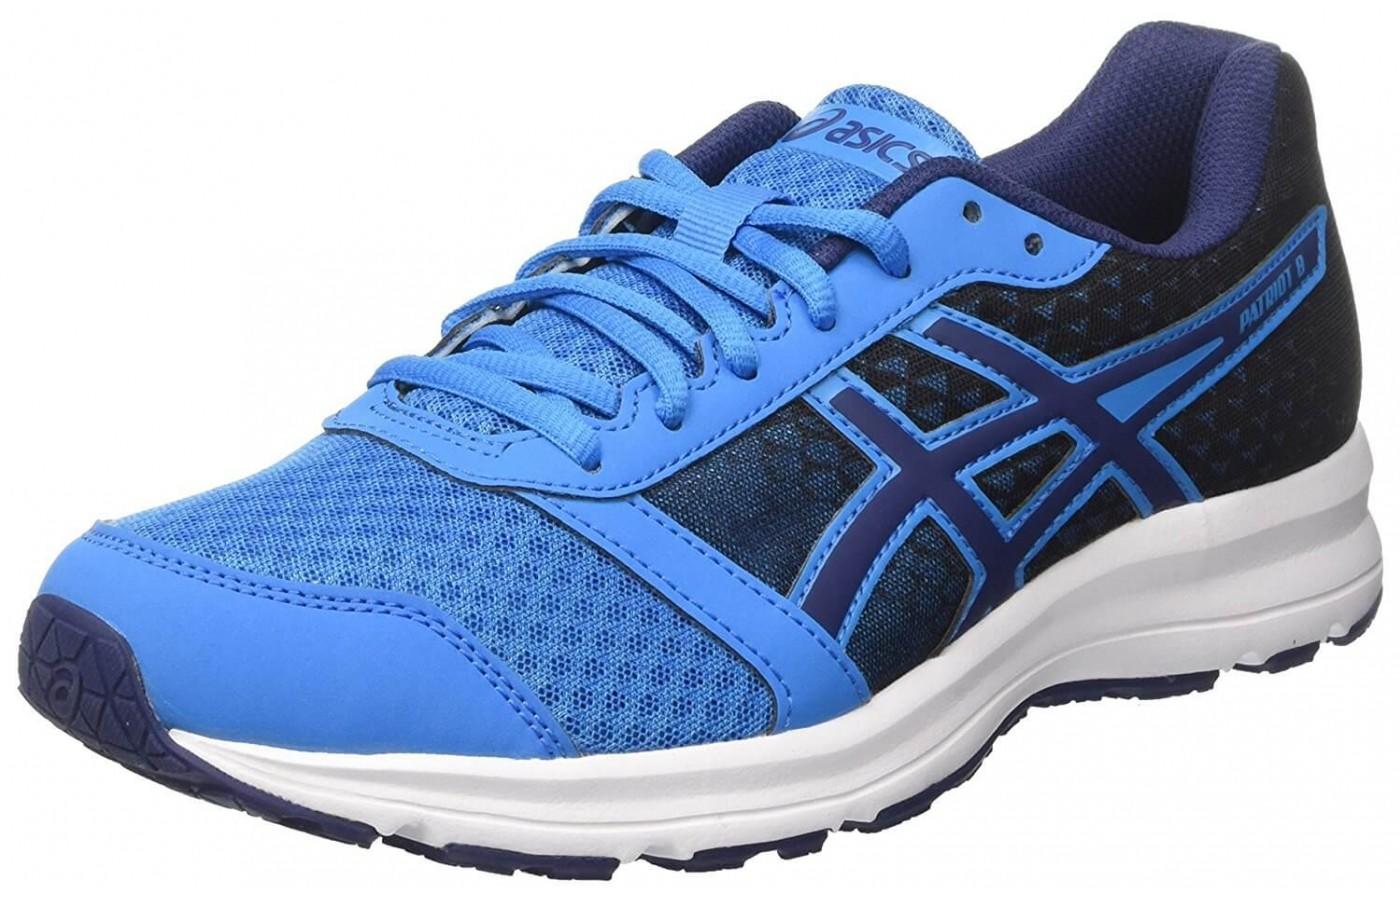 here is a look at the ASICS Patriot 8